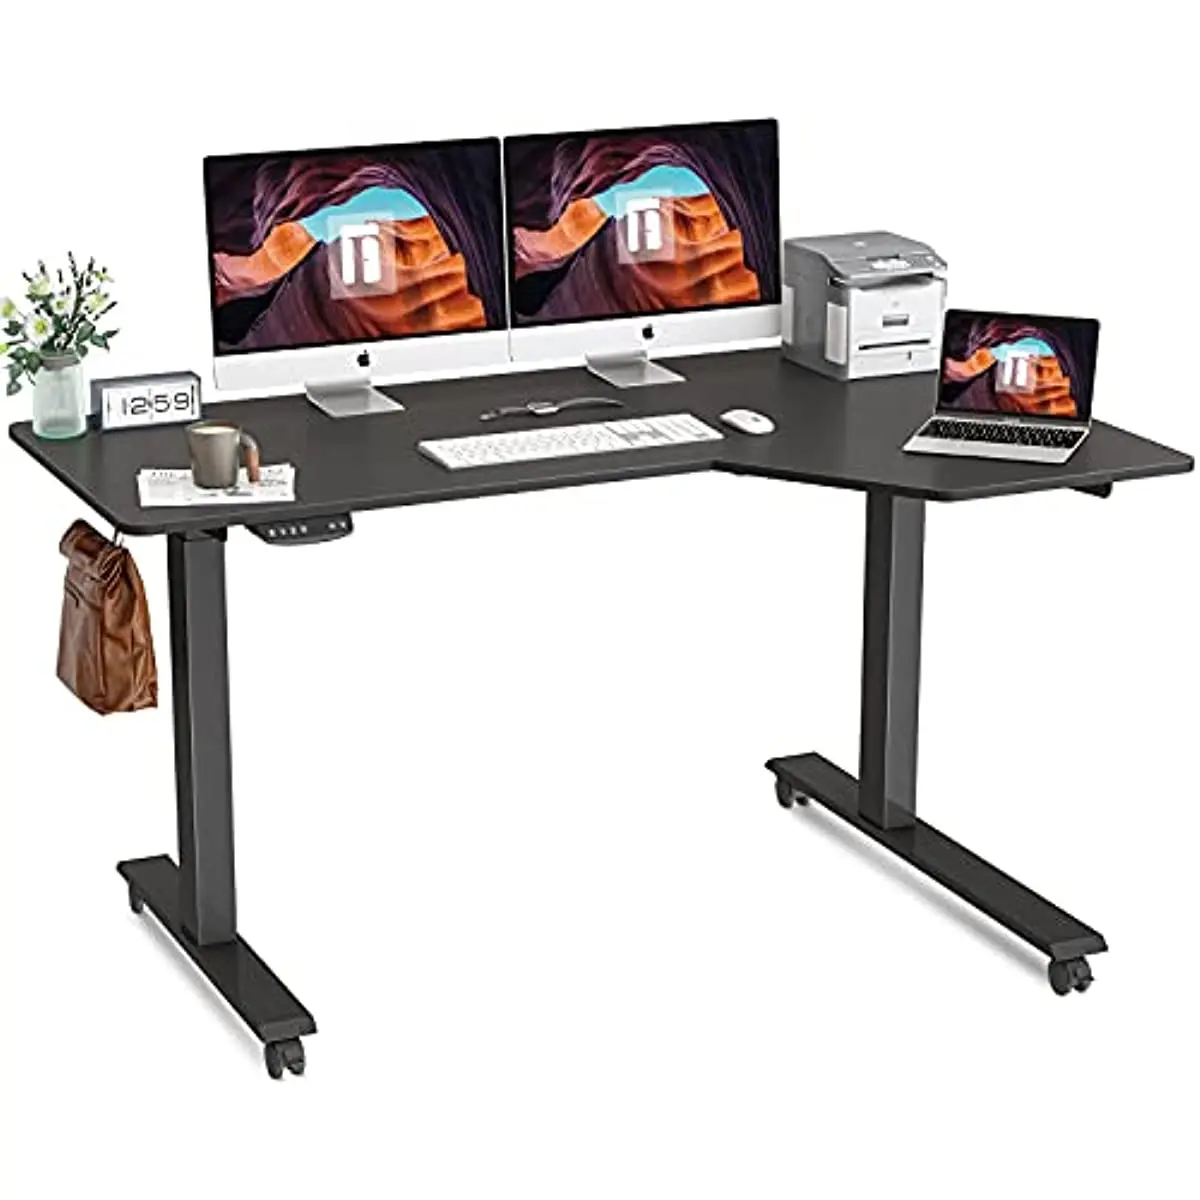 

Reversible L-Shaped Electric Standing Desk, 55 Inch Height Adjustable Stand up Table, Sit Stand Desk with Splice Board